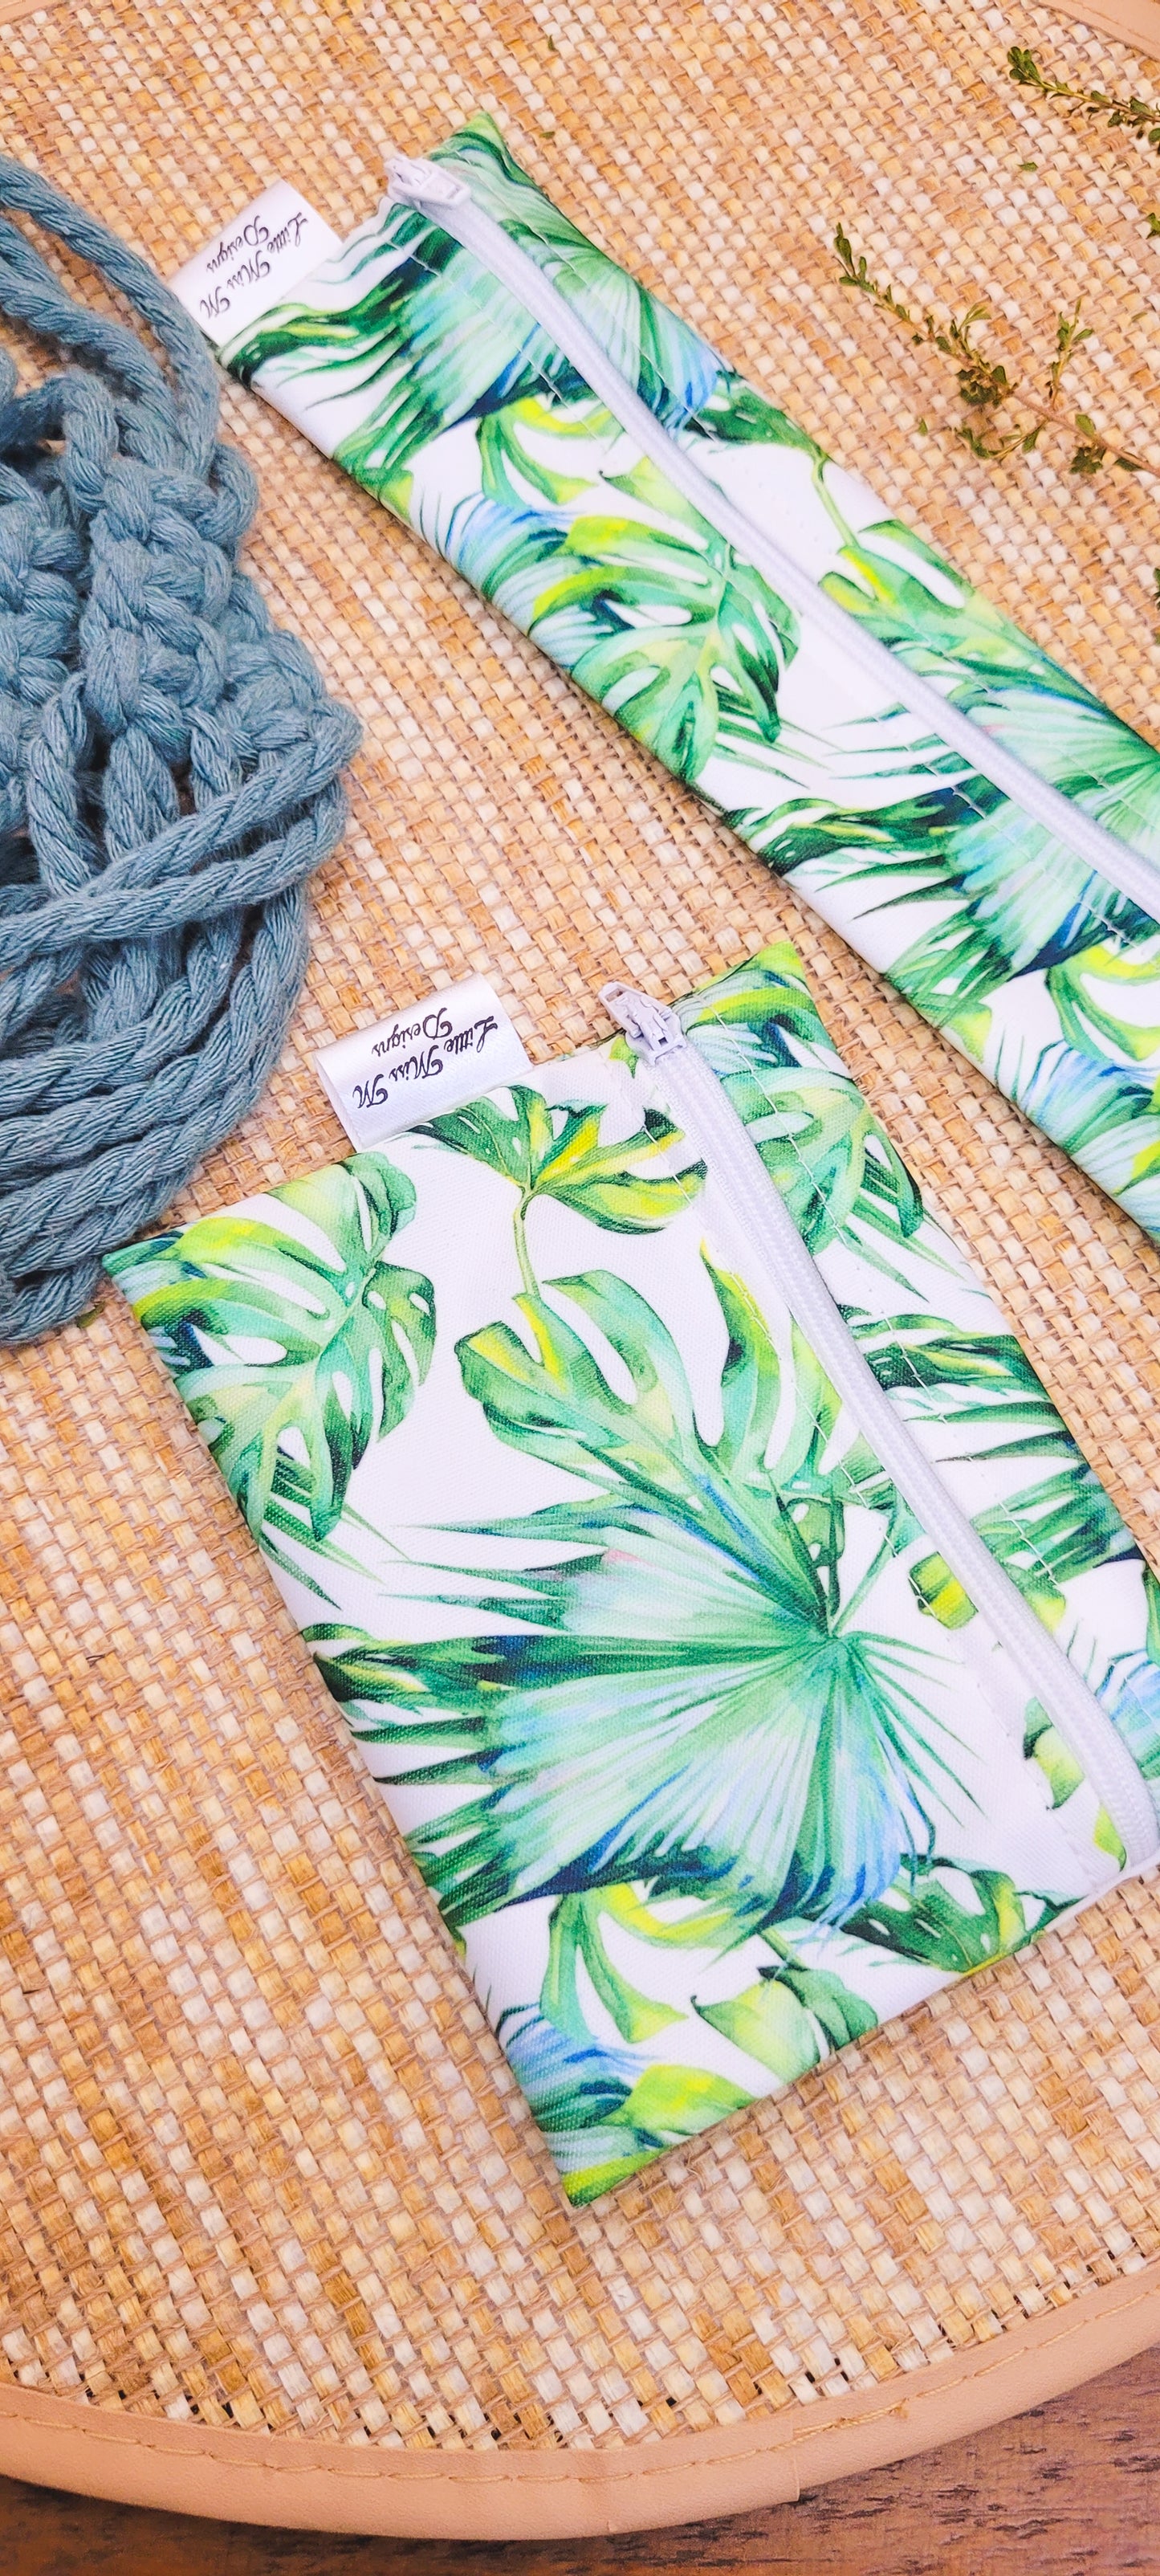 Tropical Travel Soap & Toothbrush Pouch